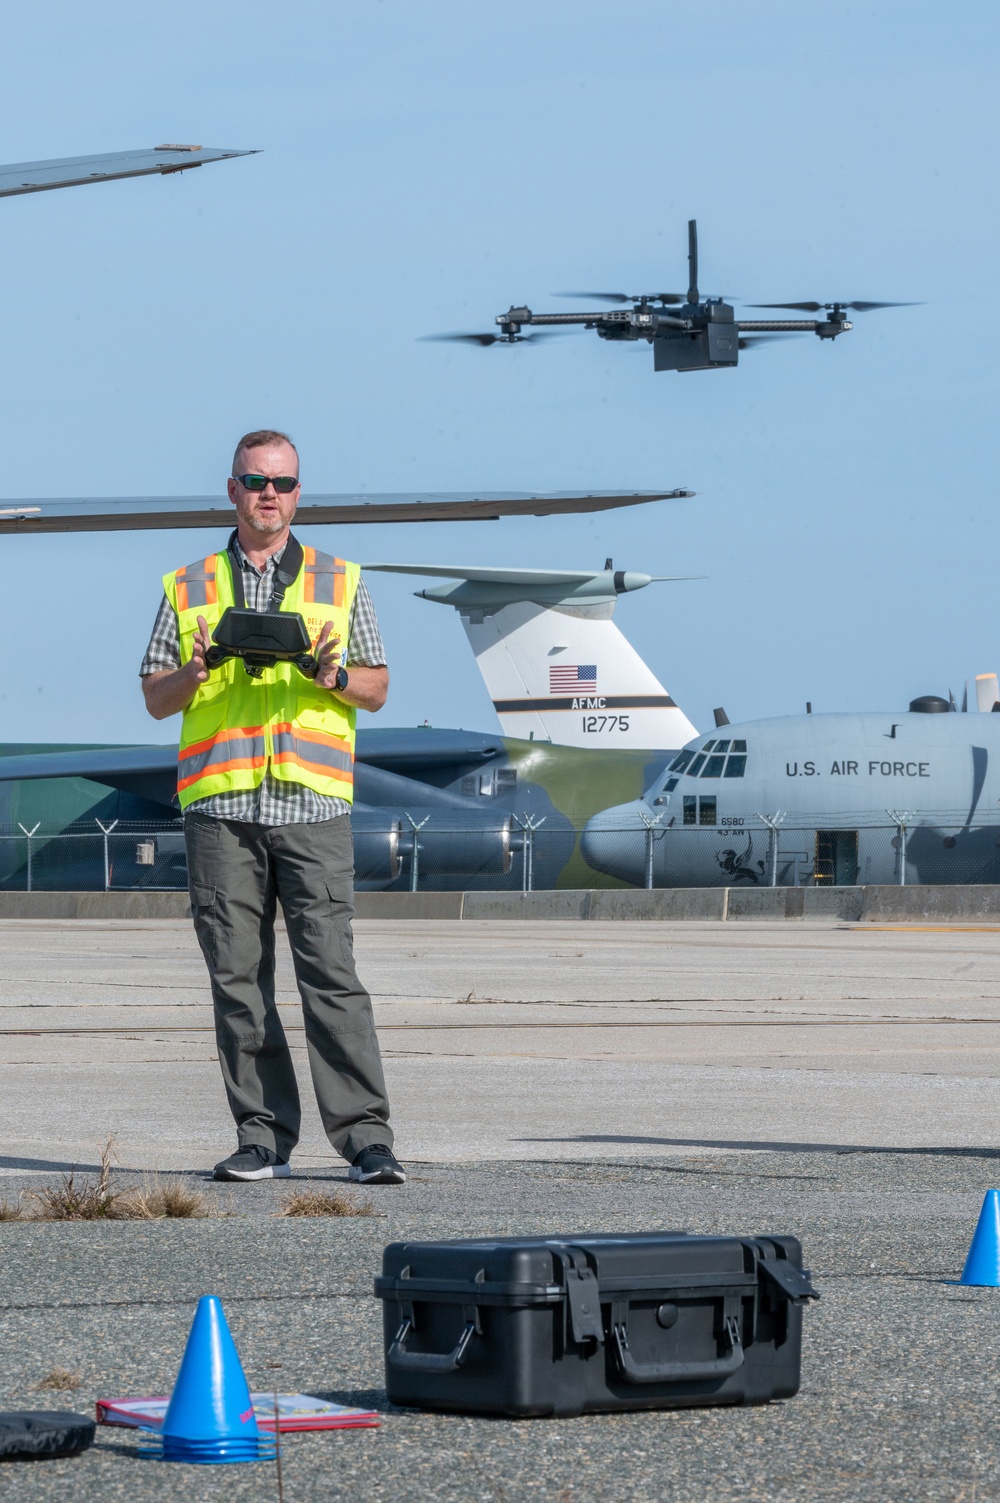 Eye in the sky: SUAS program takes flight at Dover AFB